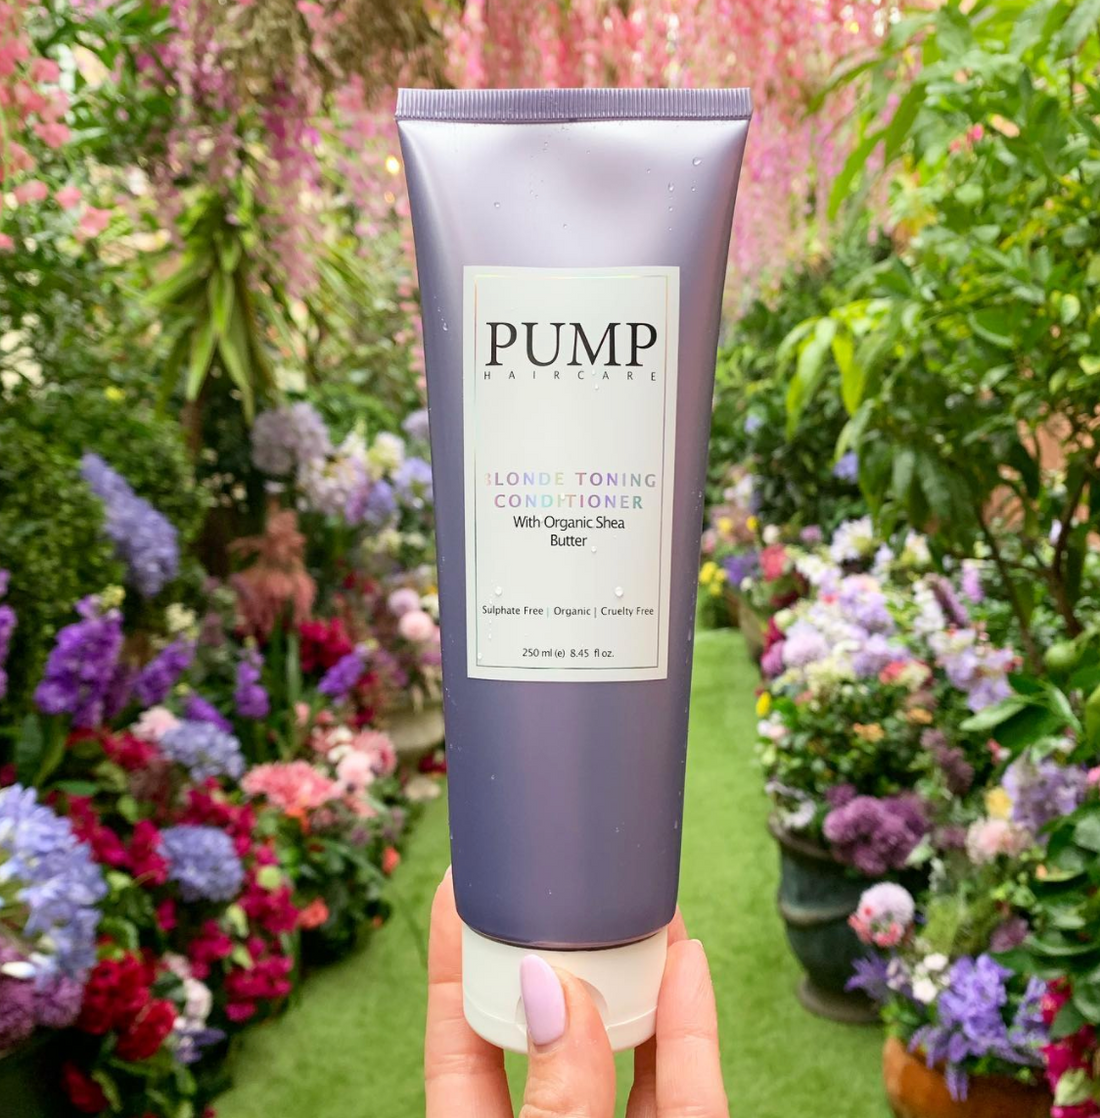 blonde toning conditioner pump haircare flowers